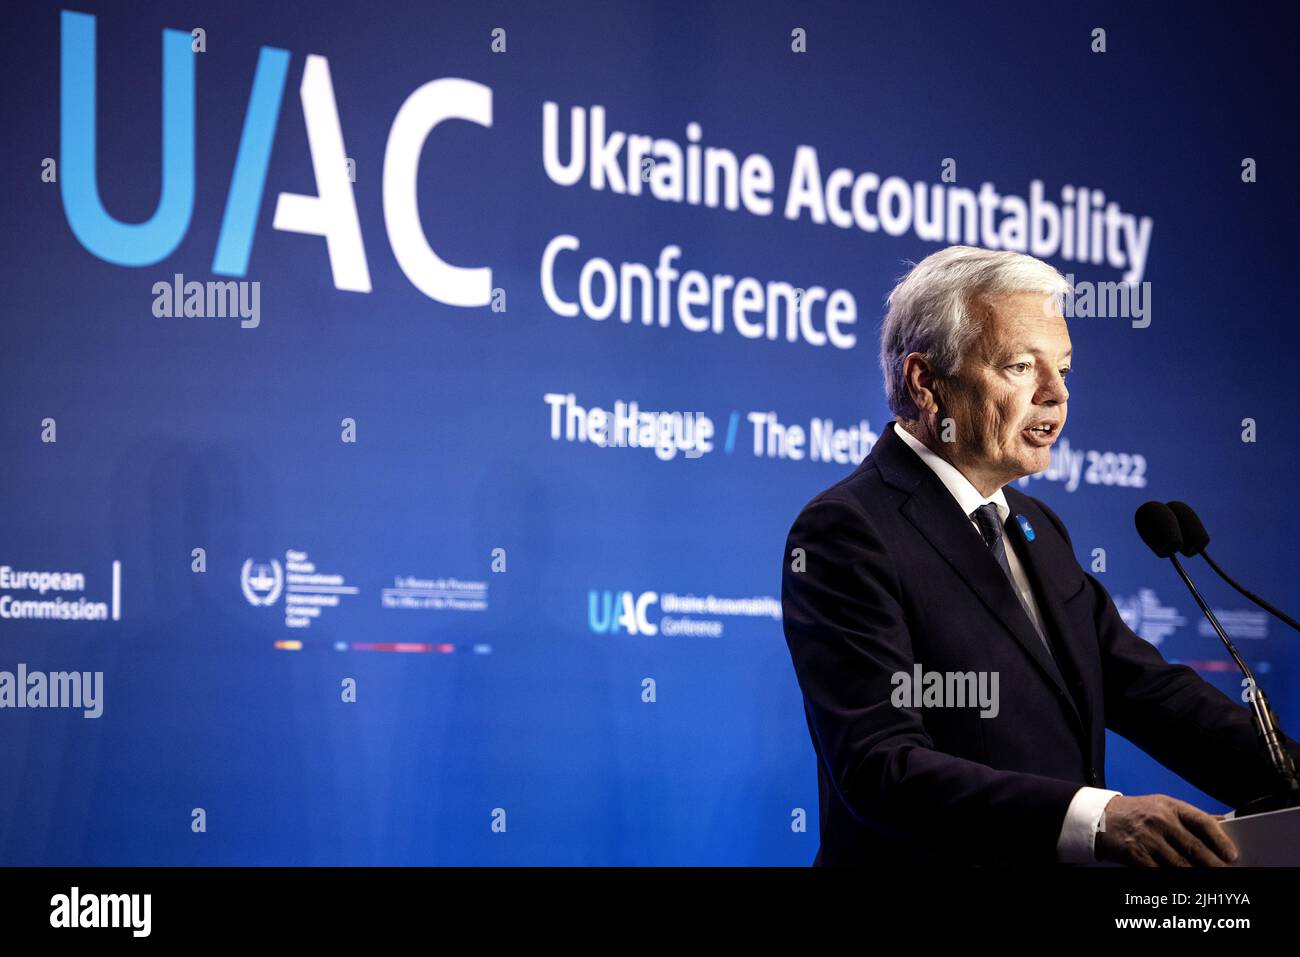 2022-07-14 14:29:36 THE HAGUE - European Commissioner for Justice Didier Reynders speaks during his presence at the press conference of the Ukraine Accountability Conference. ANP RAMON VAN FLYMEN netherlands out - belgium out Stock Photo